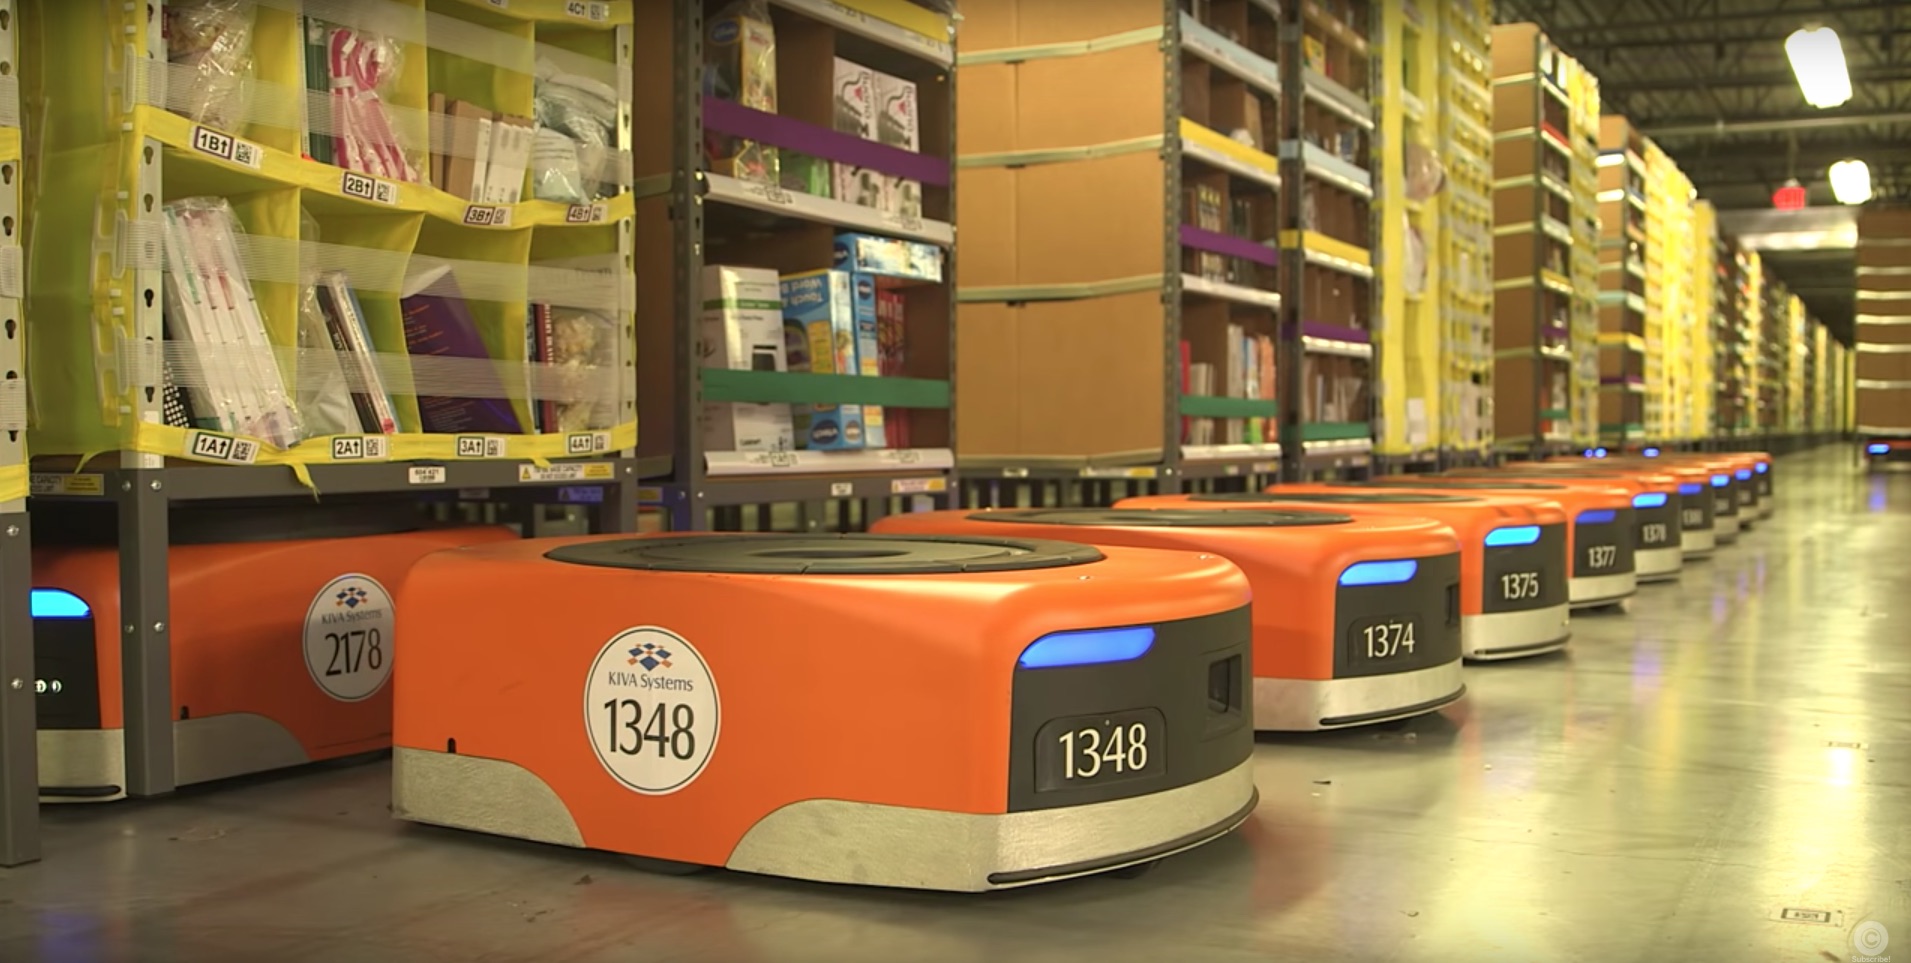 Amazon Warehouse robots lined up on the ground